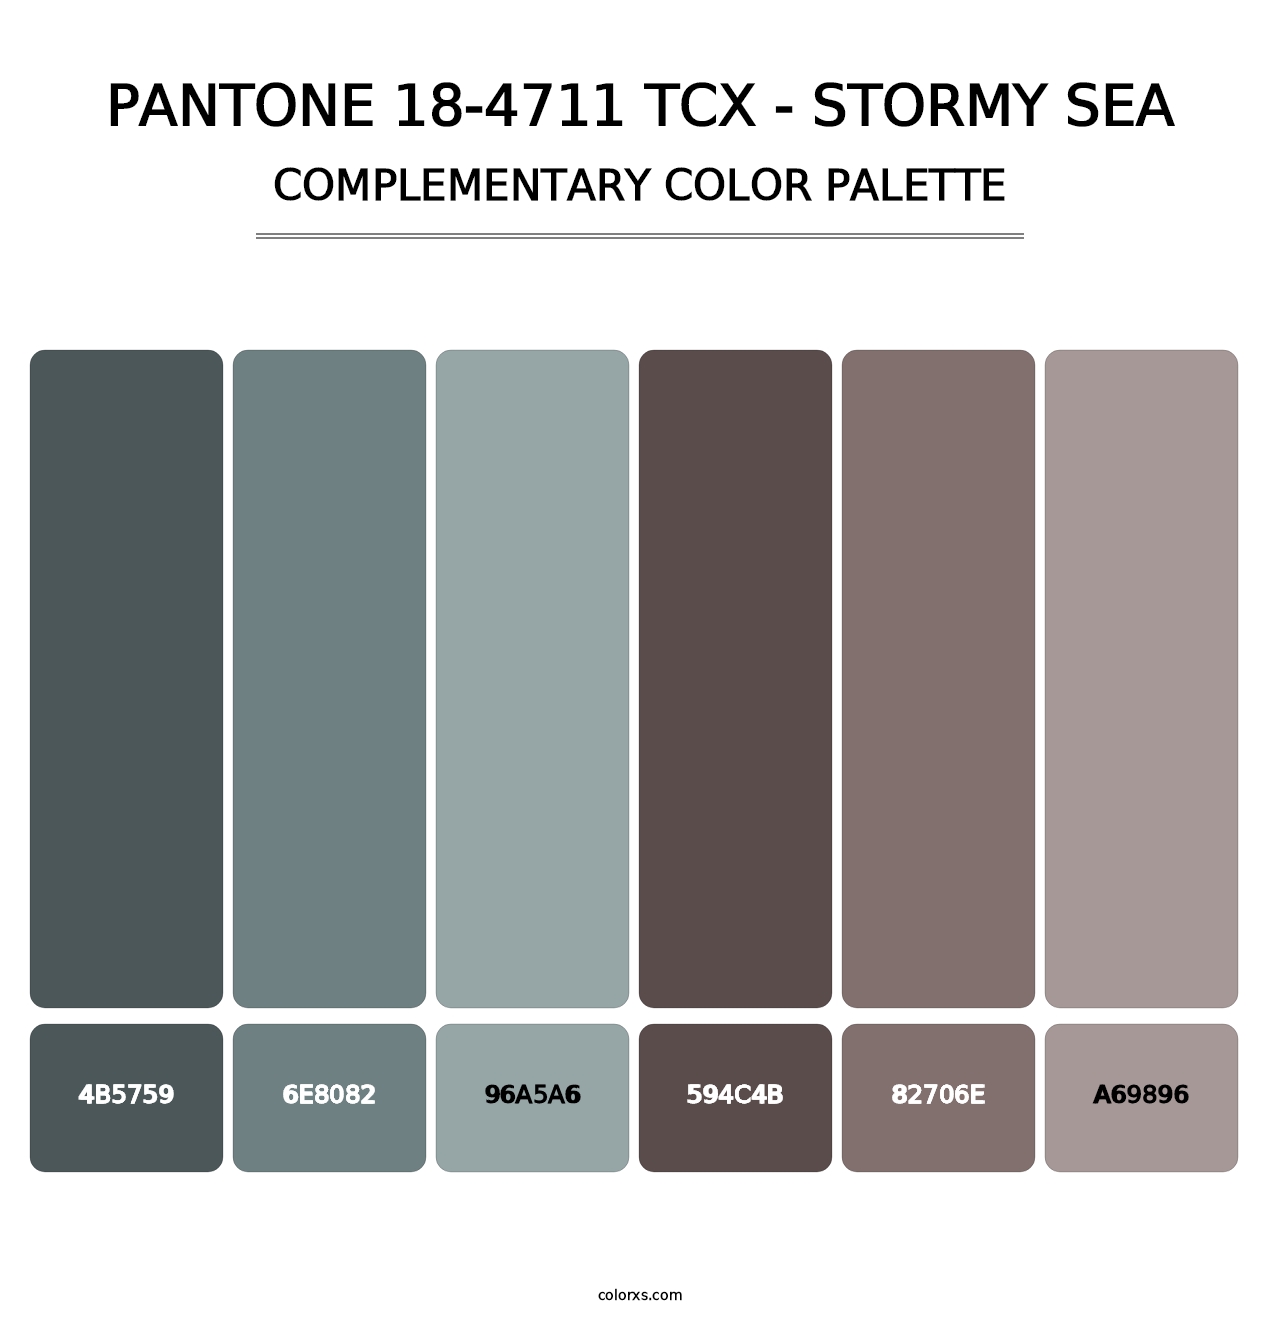 PANTONE 18-4711 TCX - Stormy Sea - Complementary Color Palette